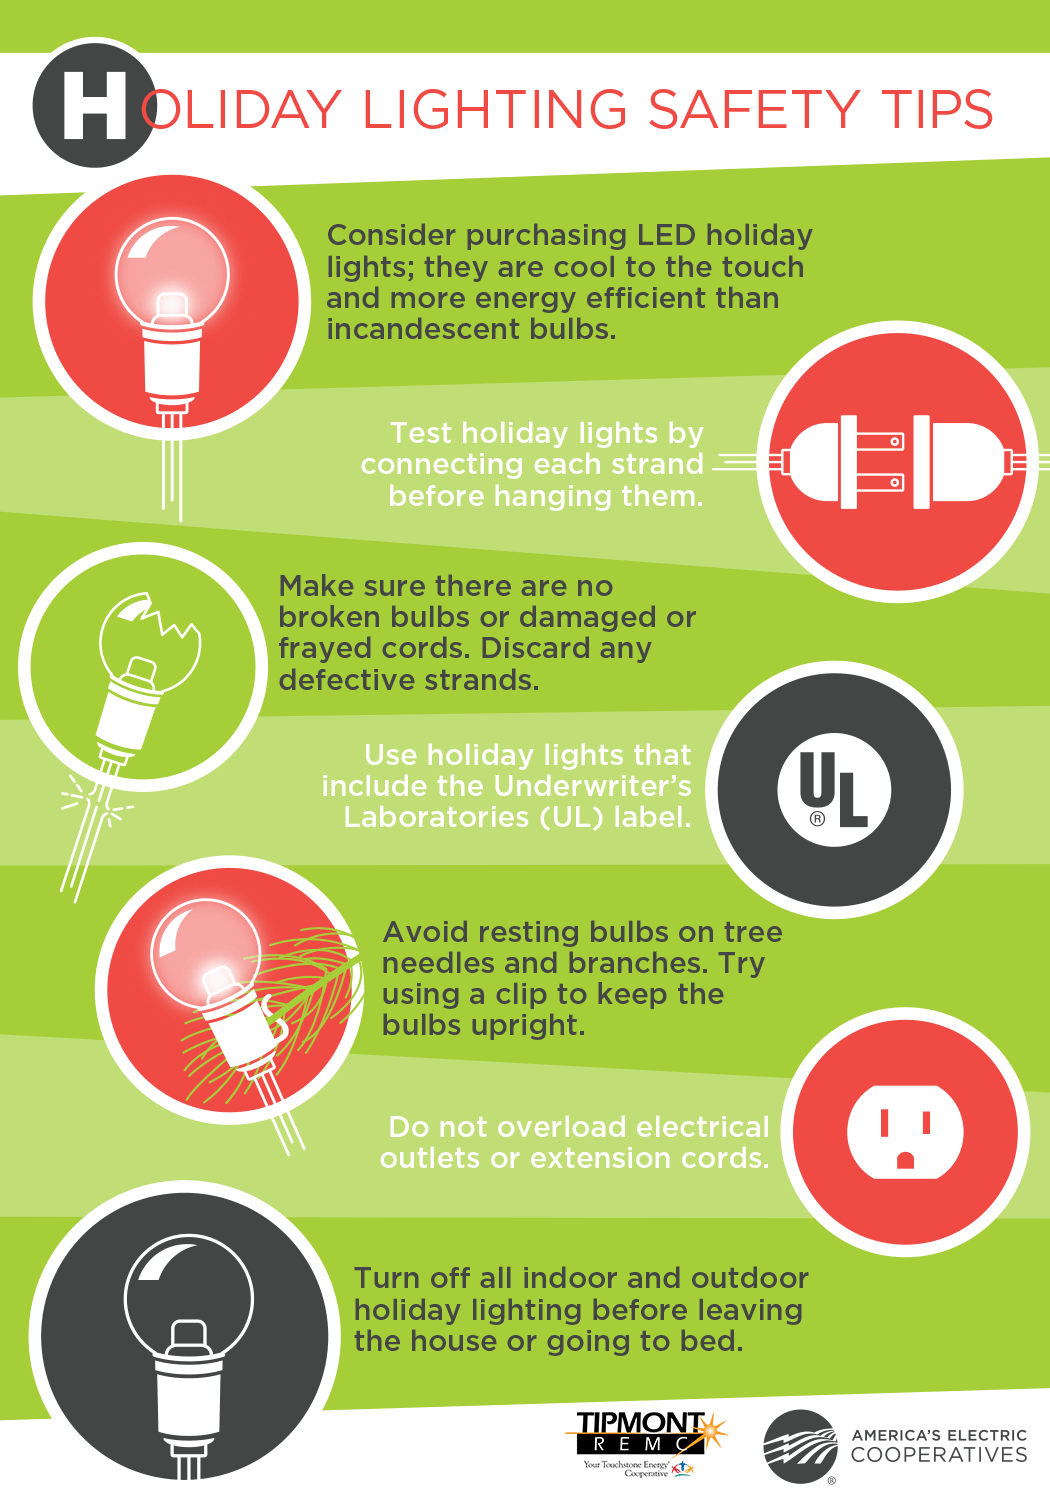 An infographic of holiday lighting safety tips